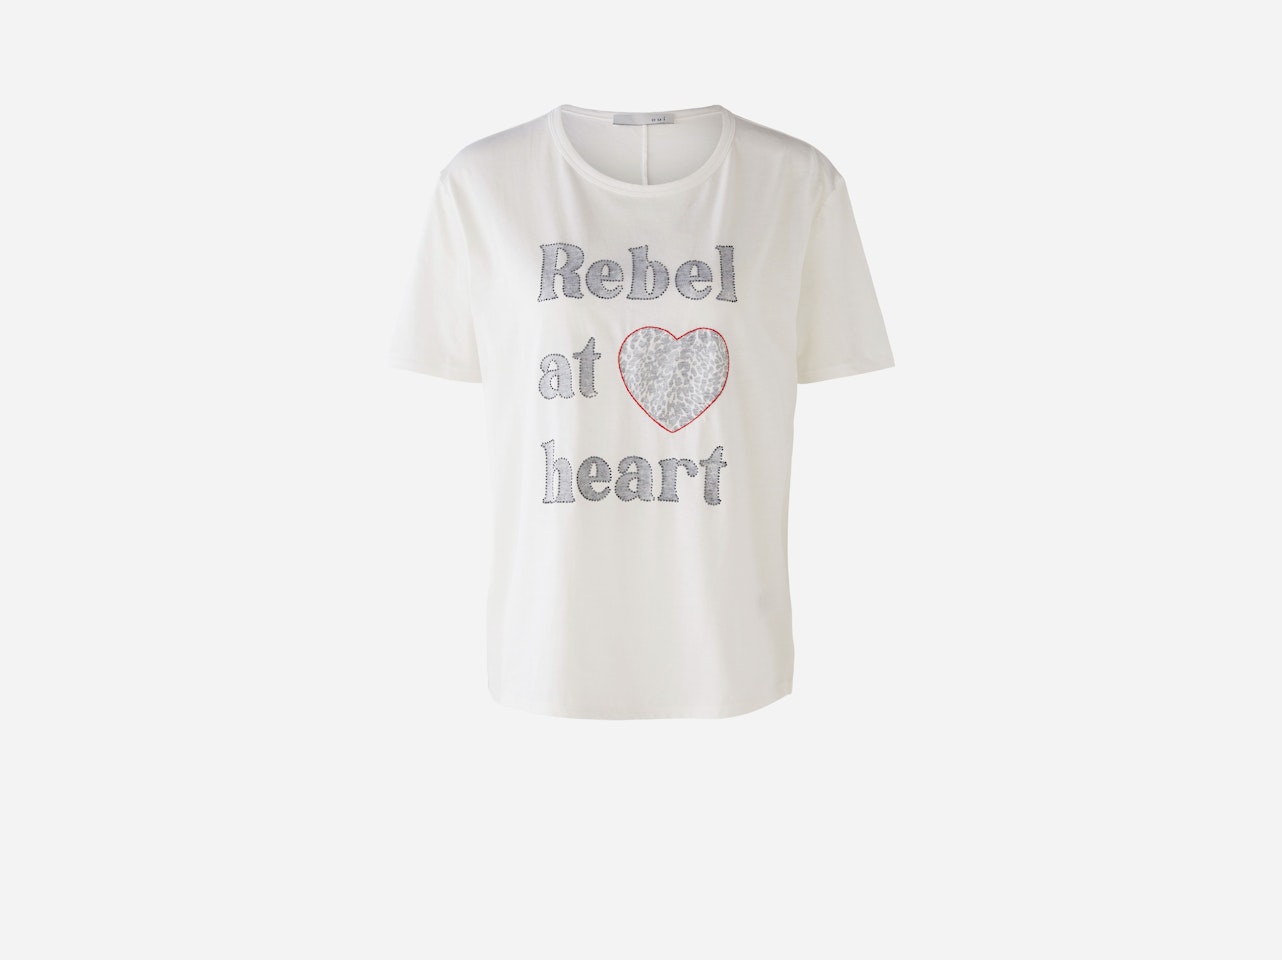 T-shirt with statement wording